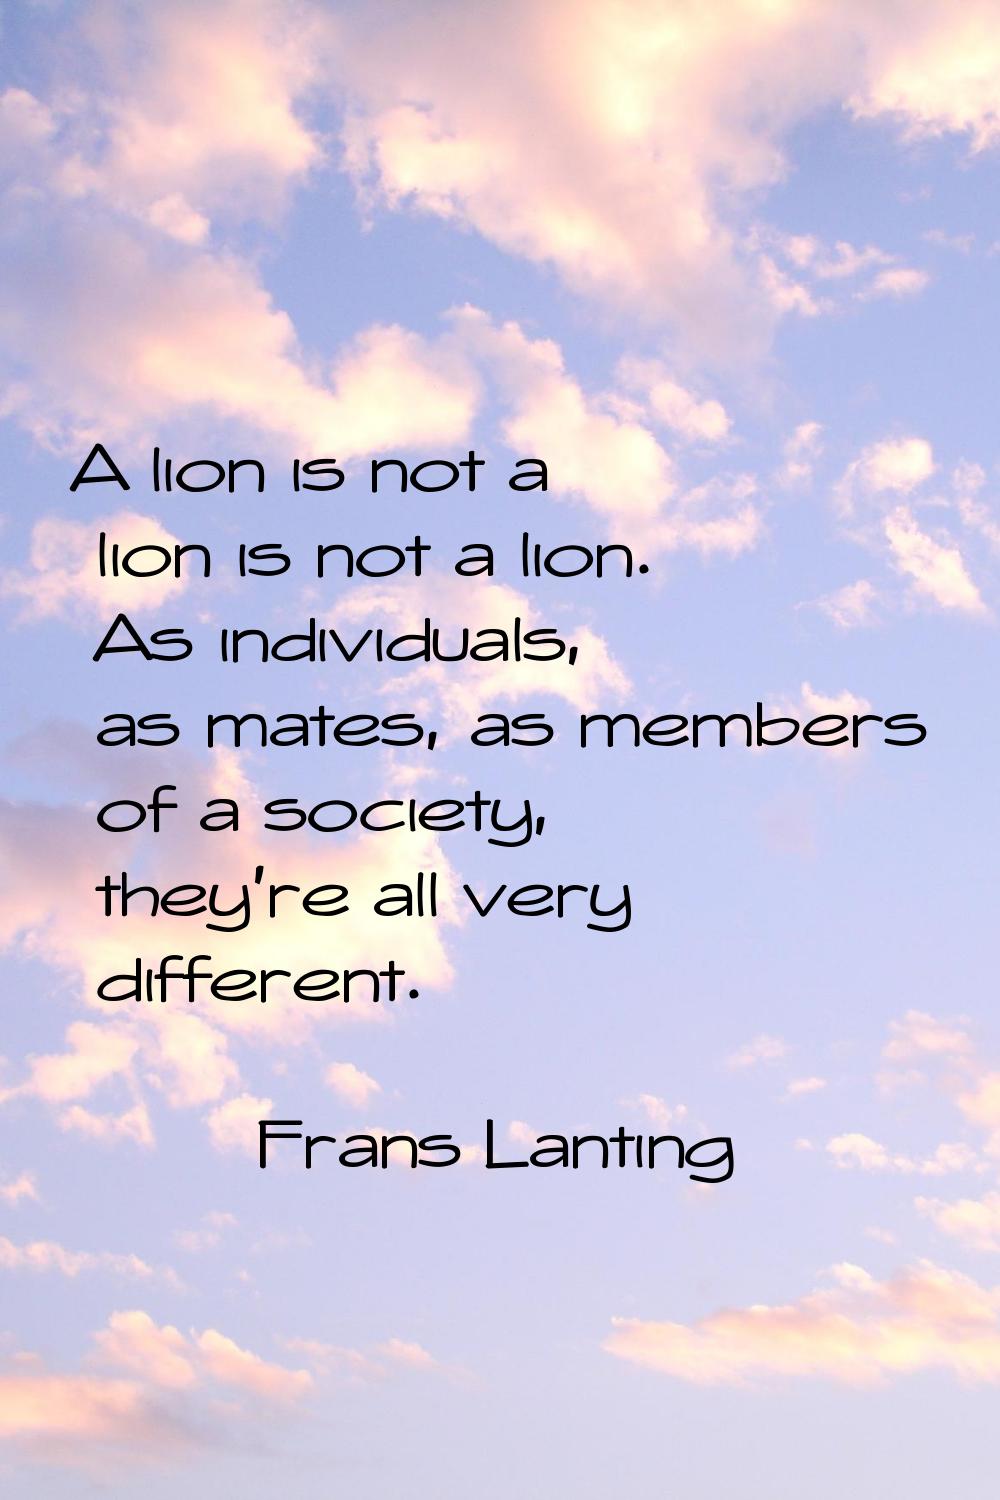 A lion is not a lion is not a lion. As individuals, as mates, as members of a society, they're all 